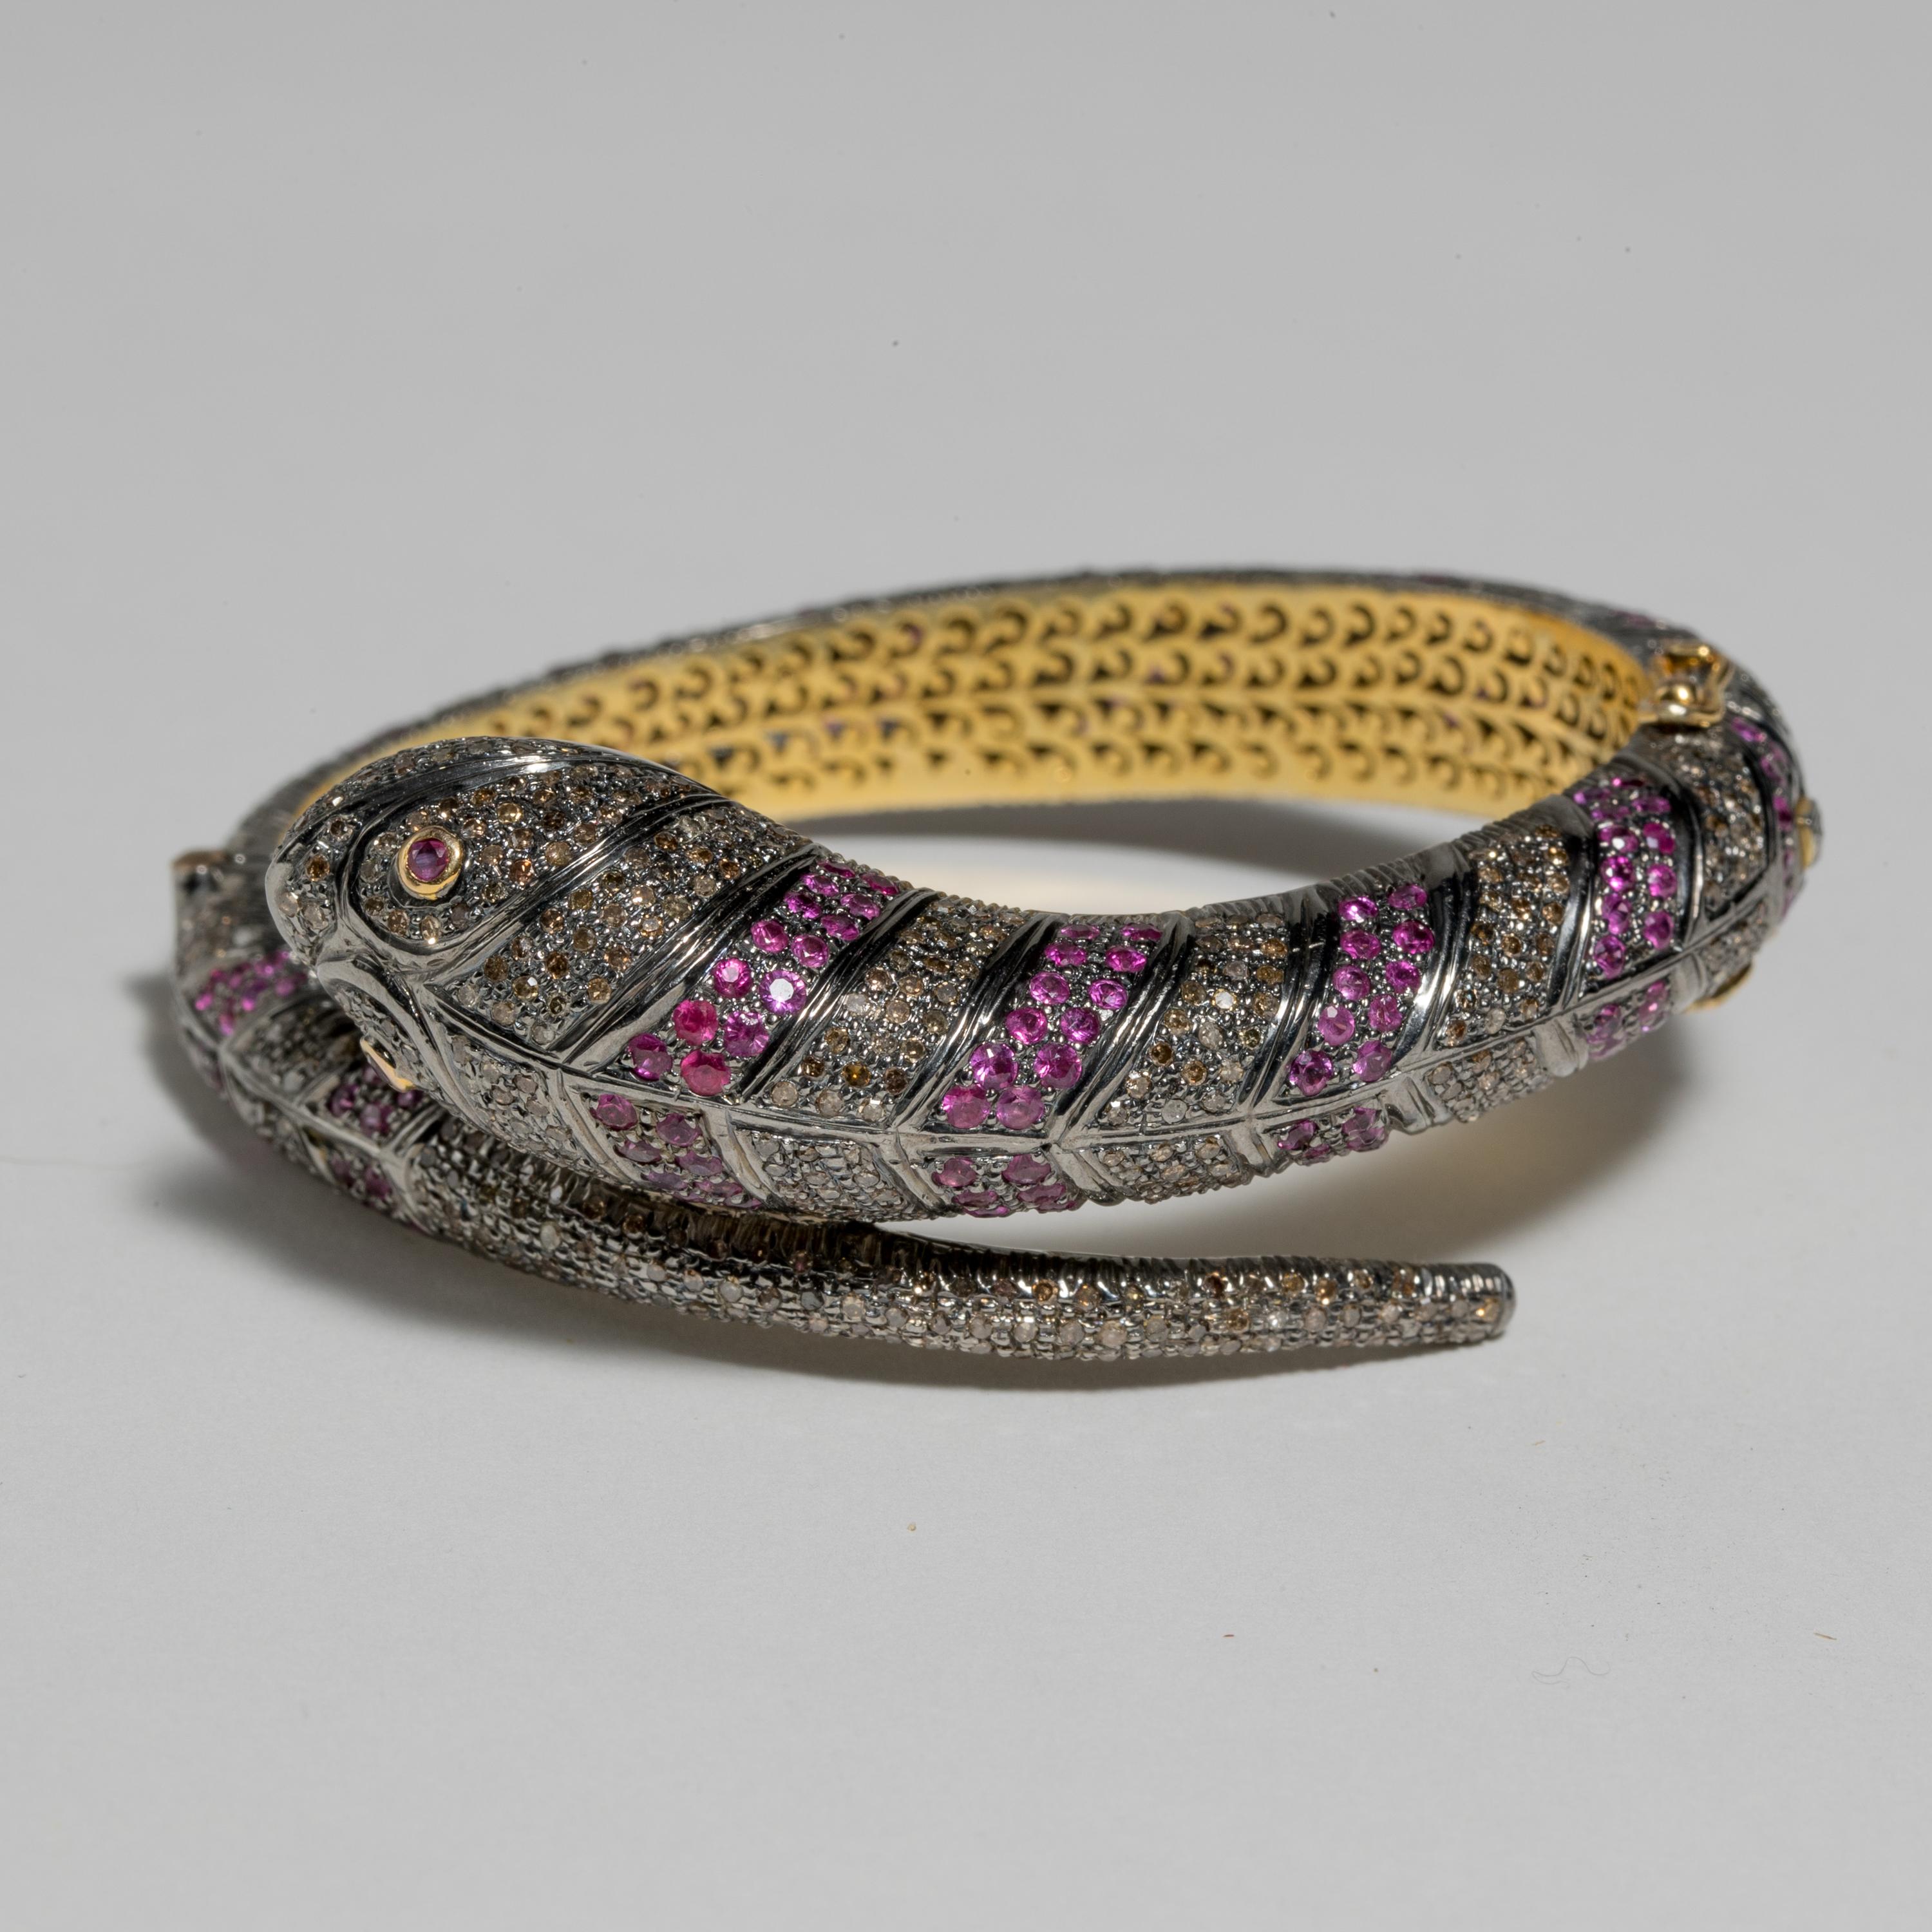 A snake bracelet with faceted Burmese Rubies and Diamonds in a pave` setting.  18K gold and sterling.  Rubies and diamonds are round cuts.  Diamonds total 4.40 carats; rubies are 5.25 carats.  The oval shape keeps the snake head and tail on top of